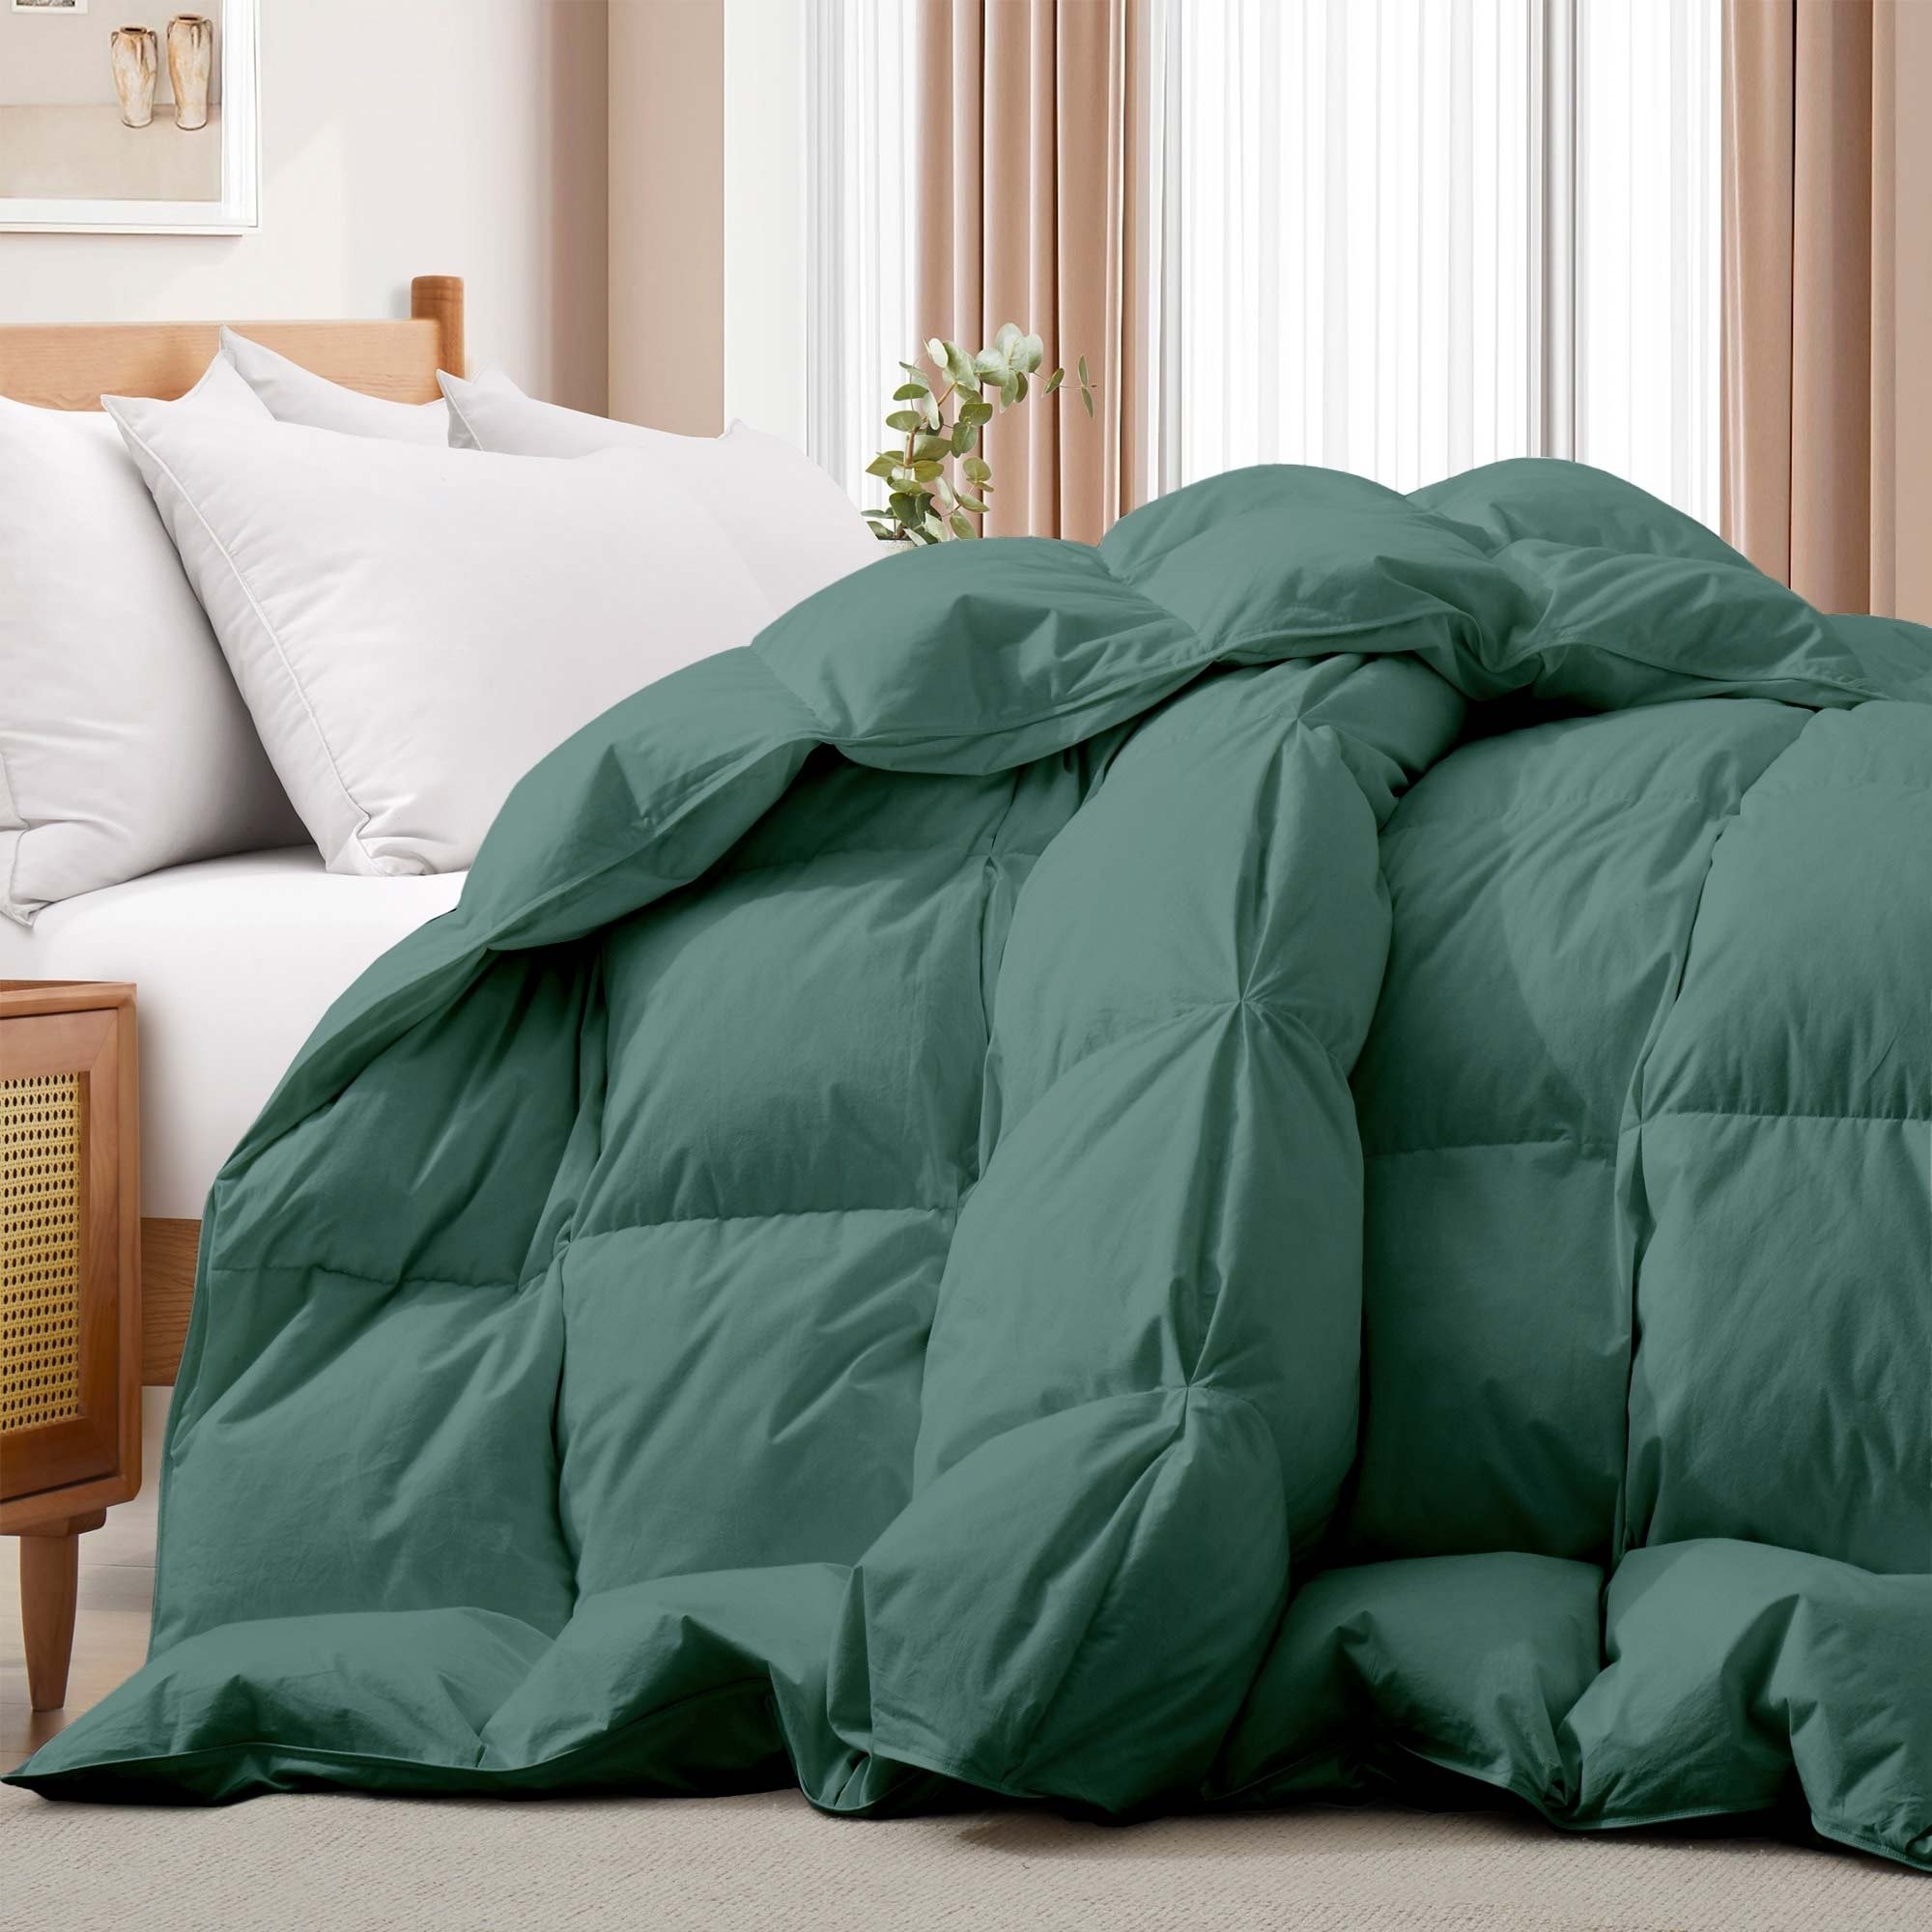 All Seasons Pinch Pleat Goose Feather And Down Comforter-Breathable Cotton Fabric Baffled Box Duvet Insert - Smoke Pine, Full/Queen